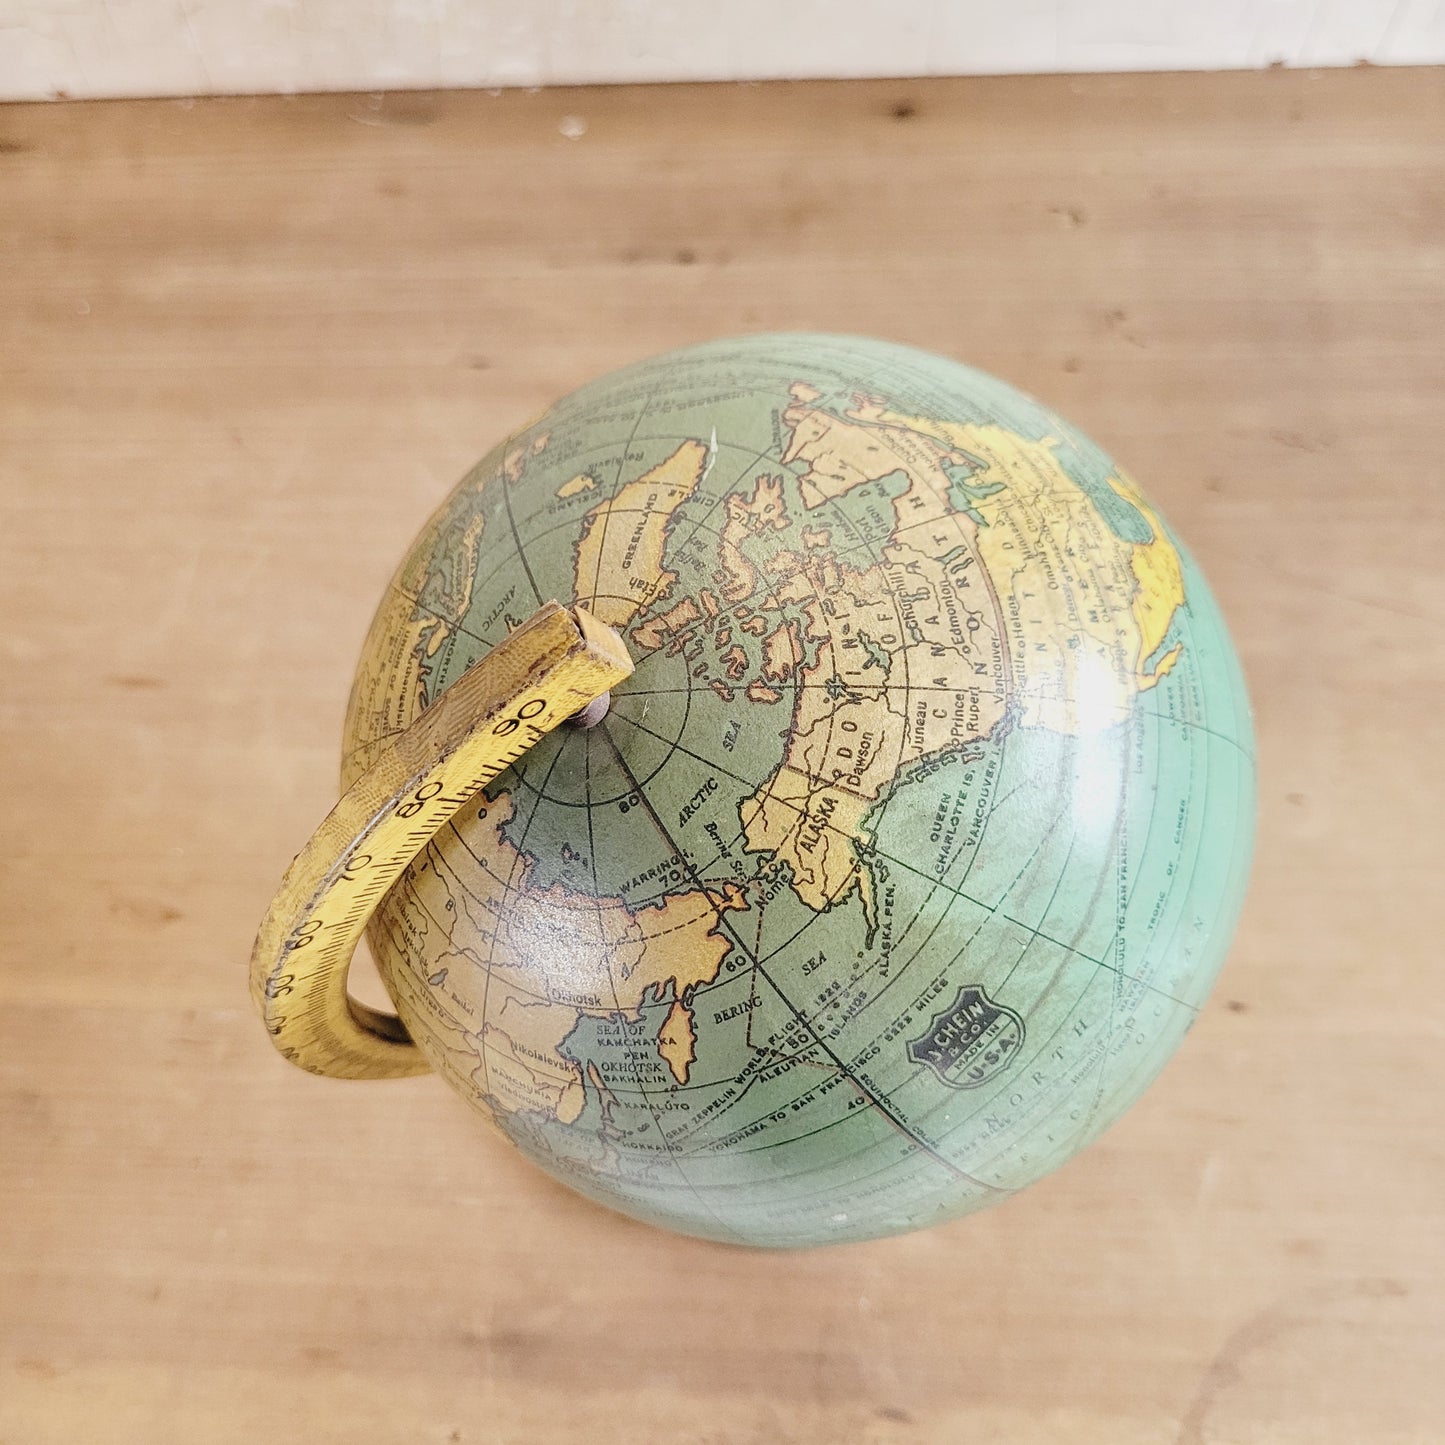 Vintage 1930s J. Chein and Co. World Globe Toy